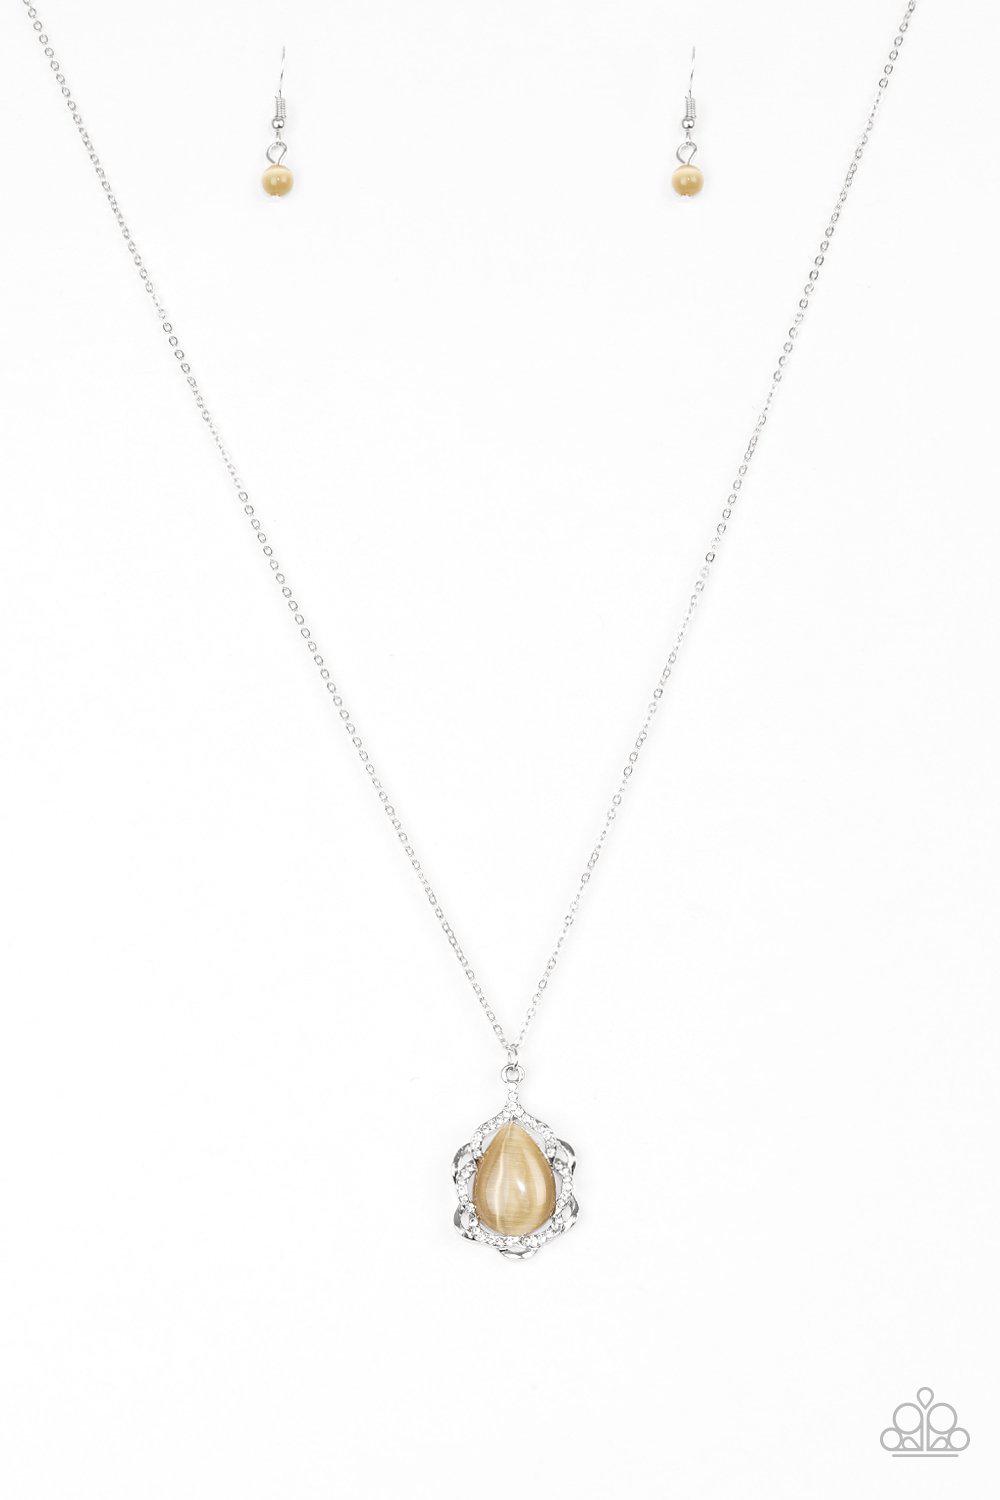 Keep It On The Down Glow Brown Moonstone Necklace - Paparazzi Accessories-CarasShop.com - $5 Jewelry by Cara Jewels